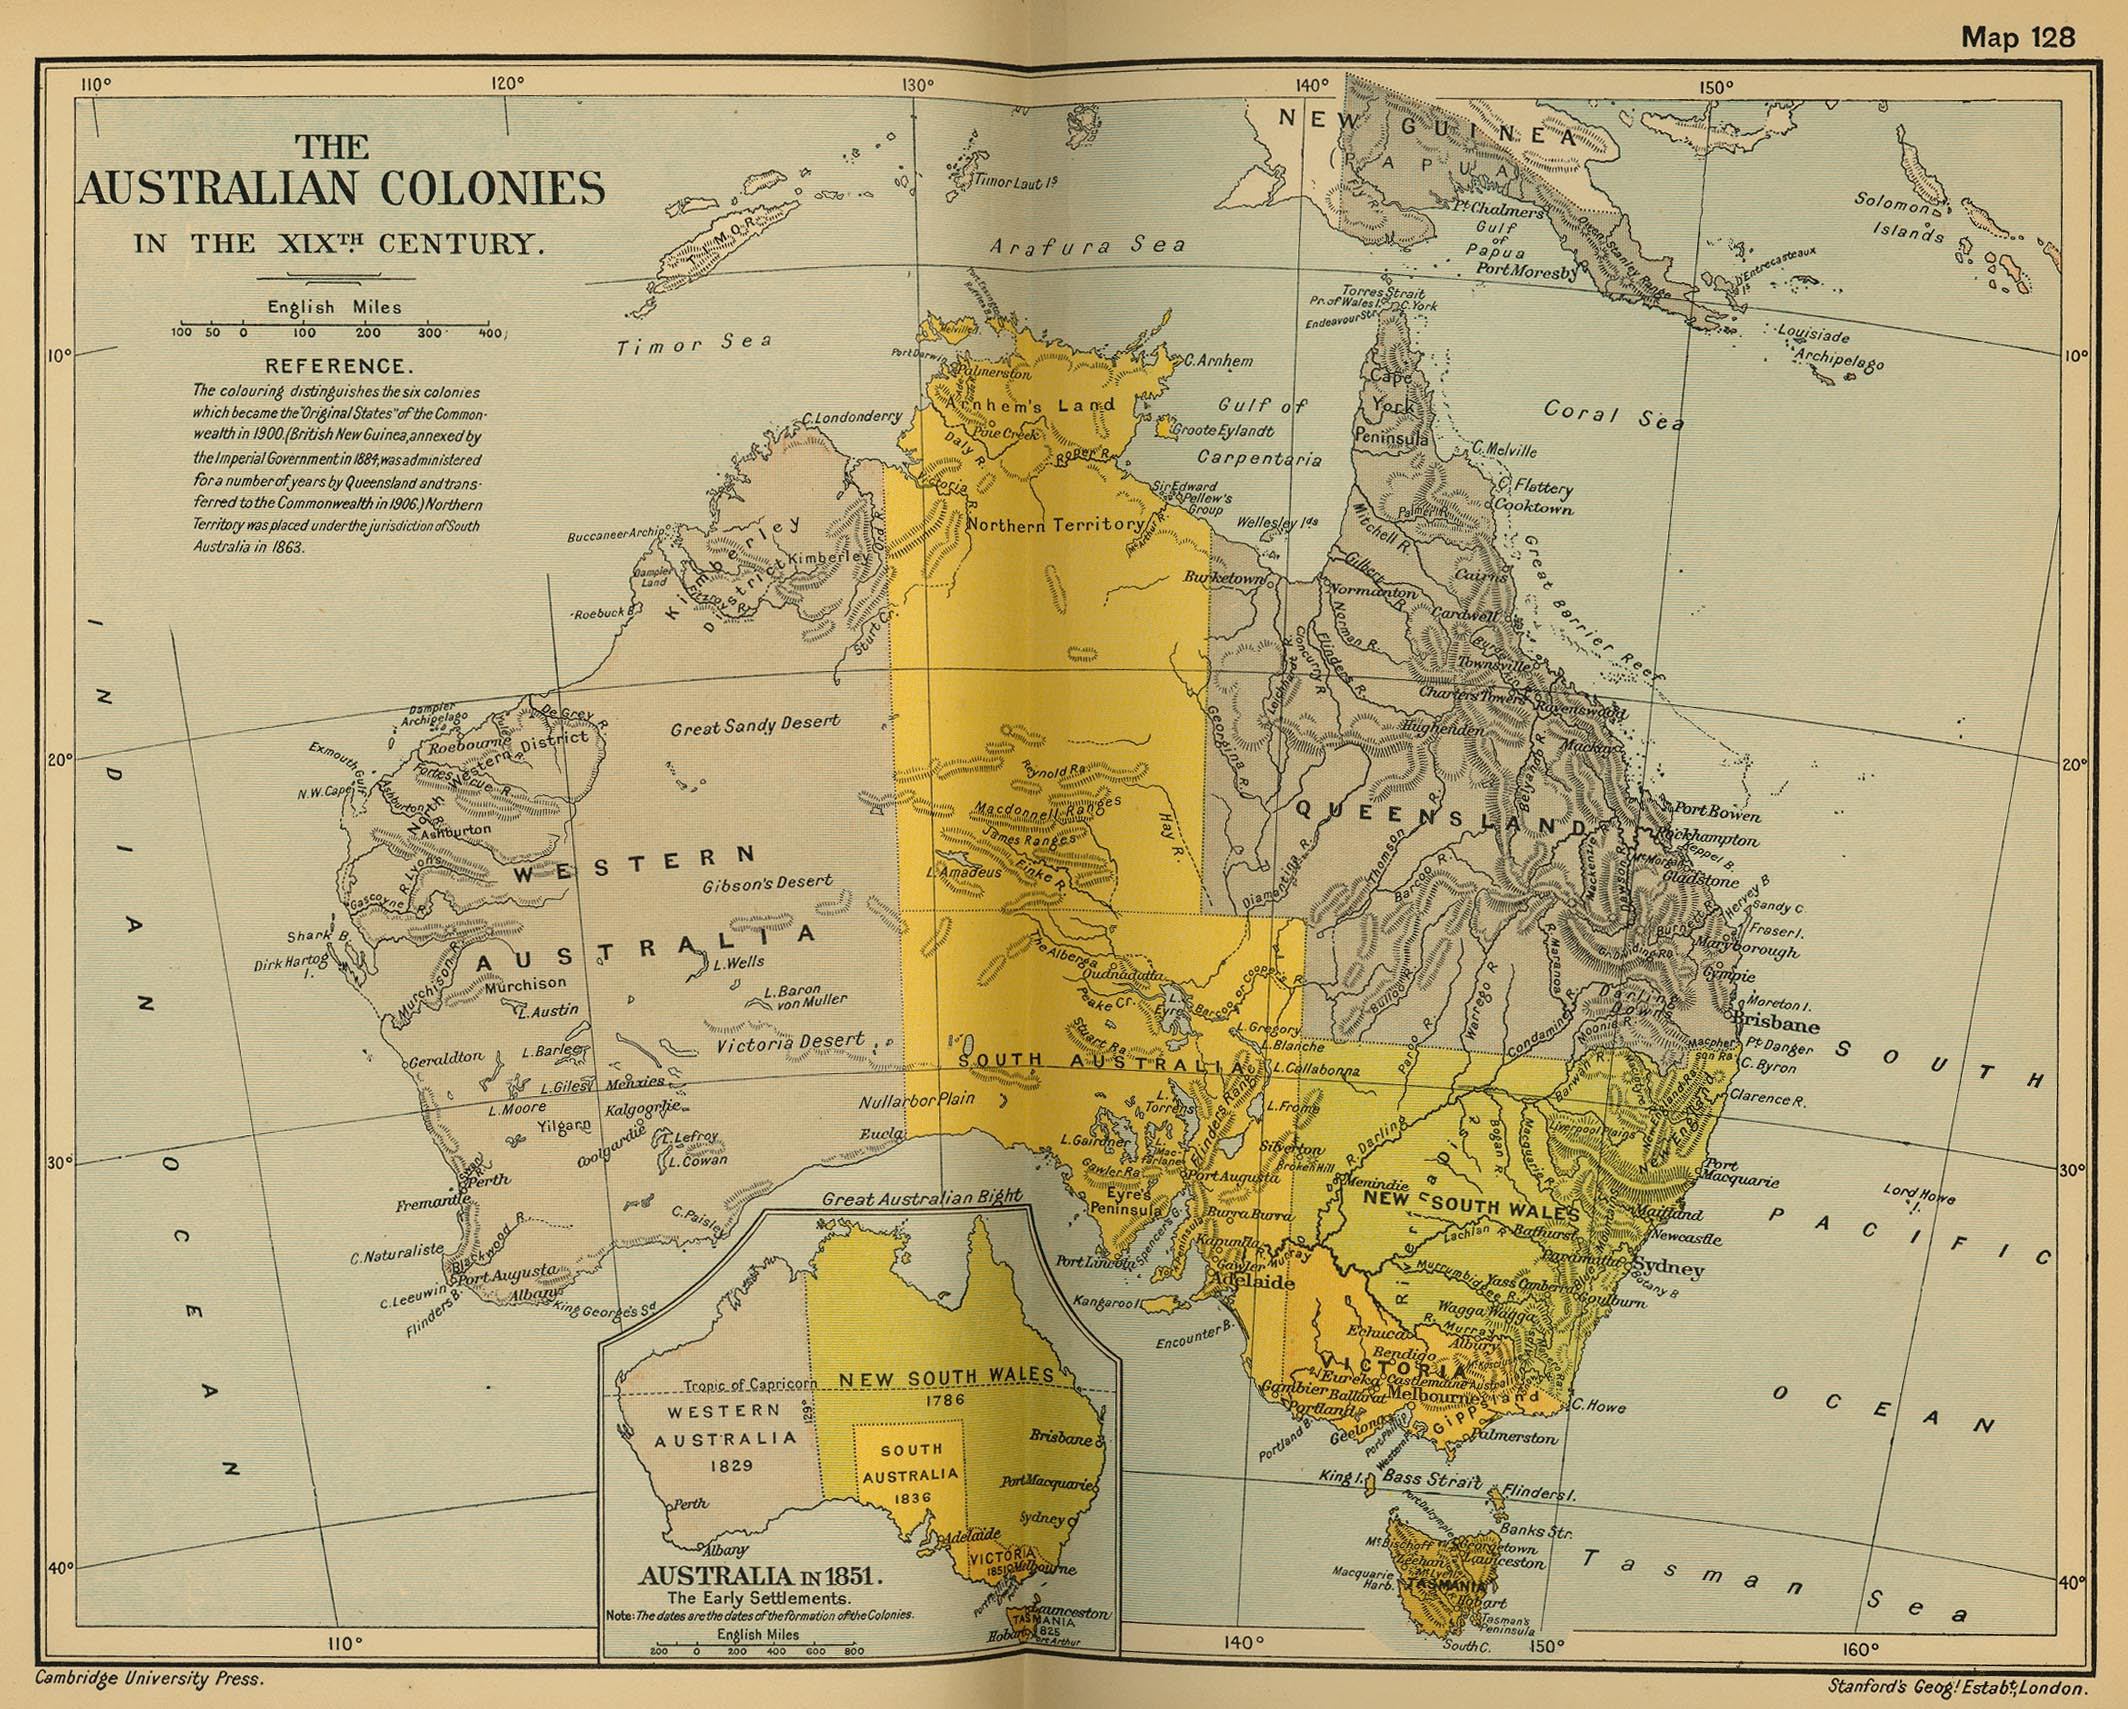 Because capricorns value tradition and have a strict way of thinking, they often struggle to open their minds and find it difficult to change their. Map Of Australia In The 19th Century